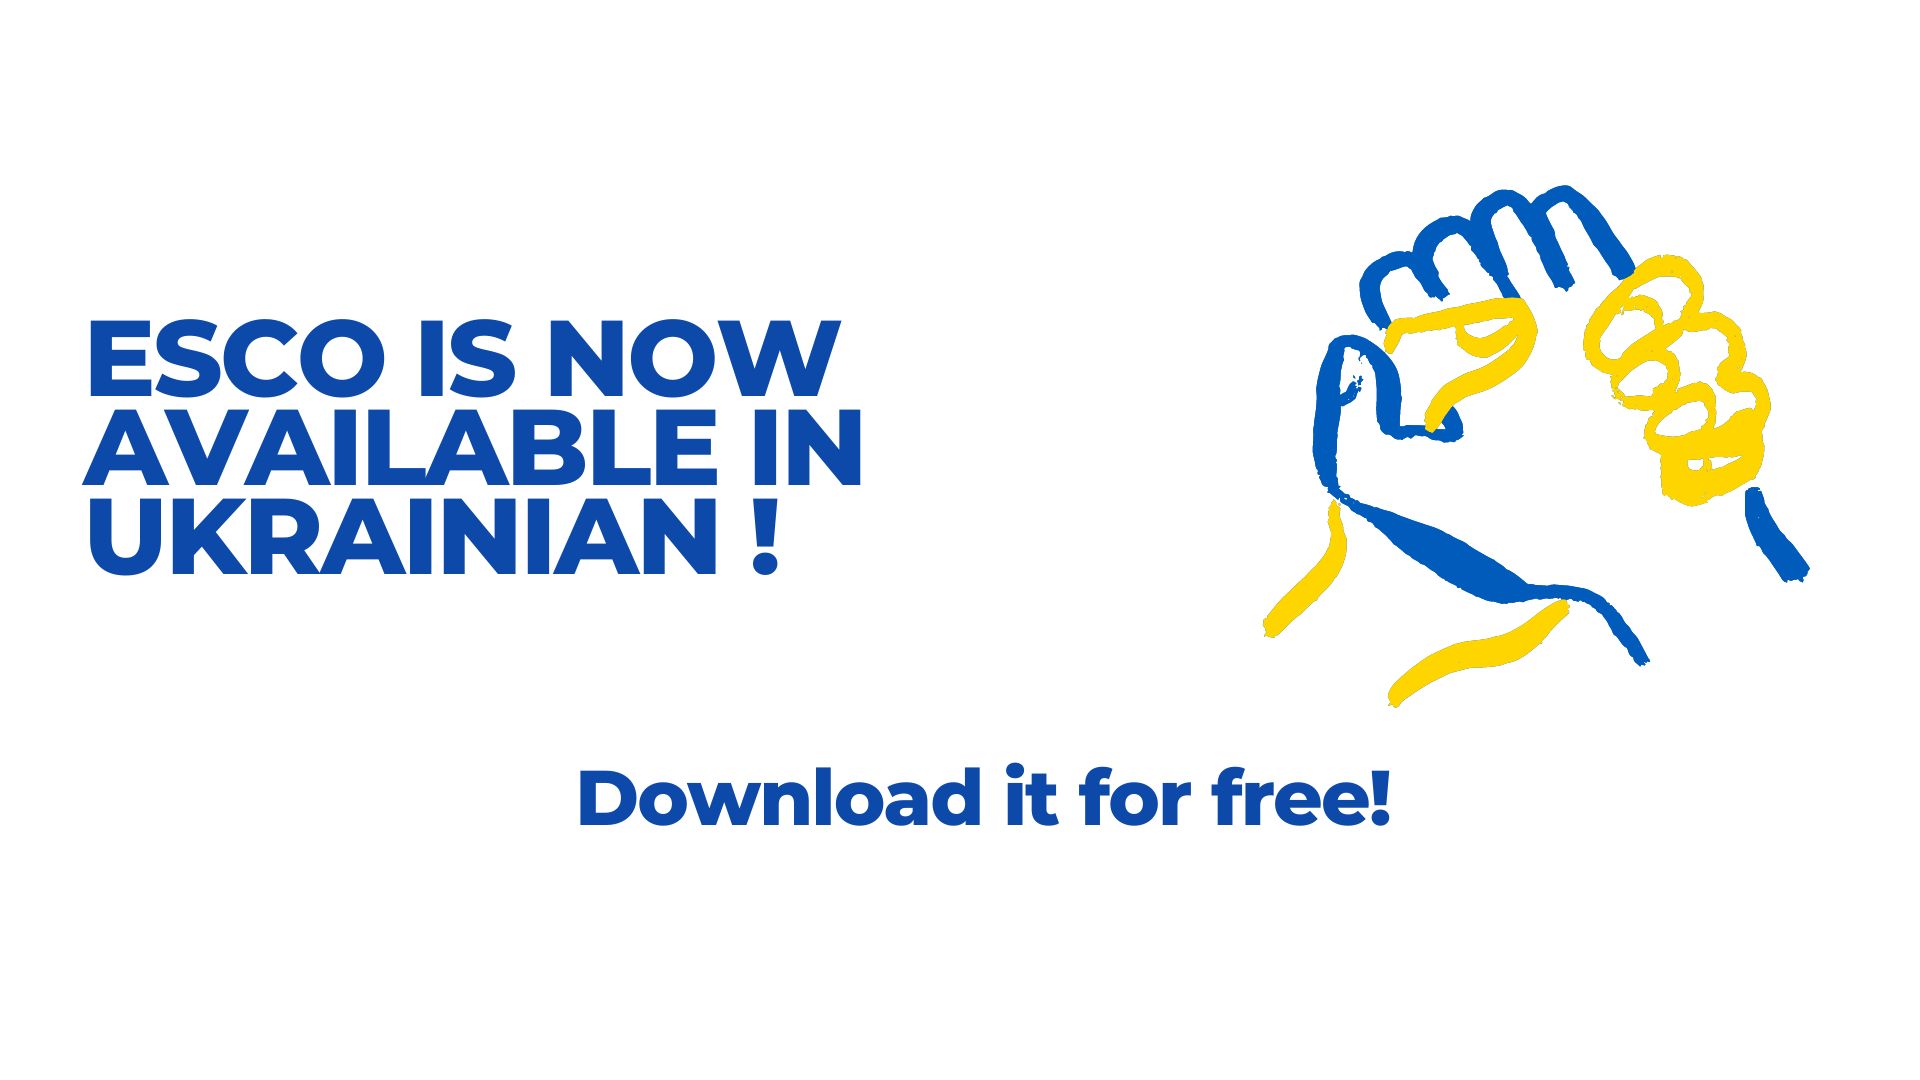 ESCO is now available in Ukrainian: download it for free